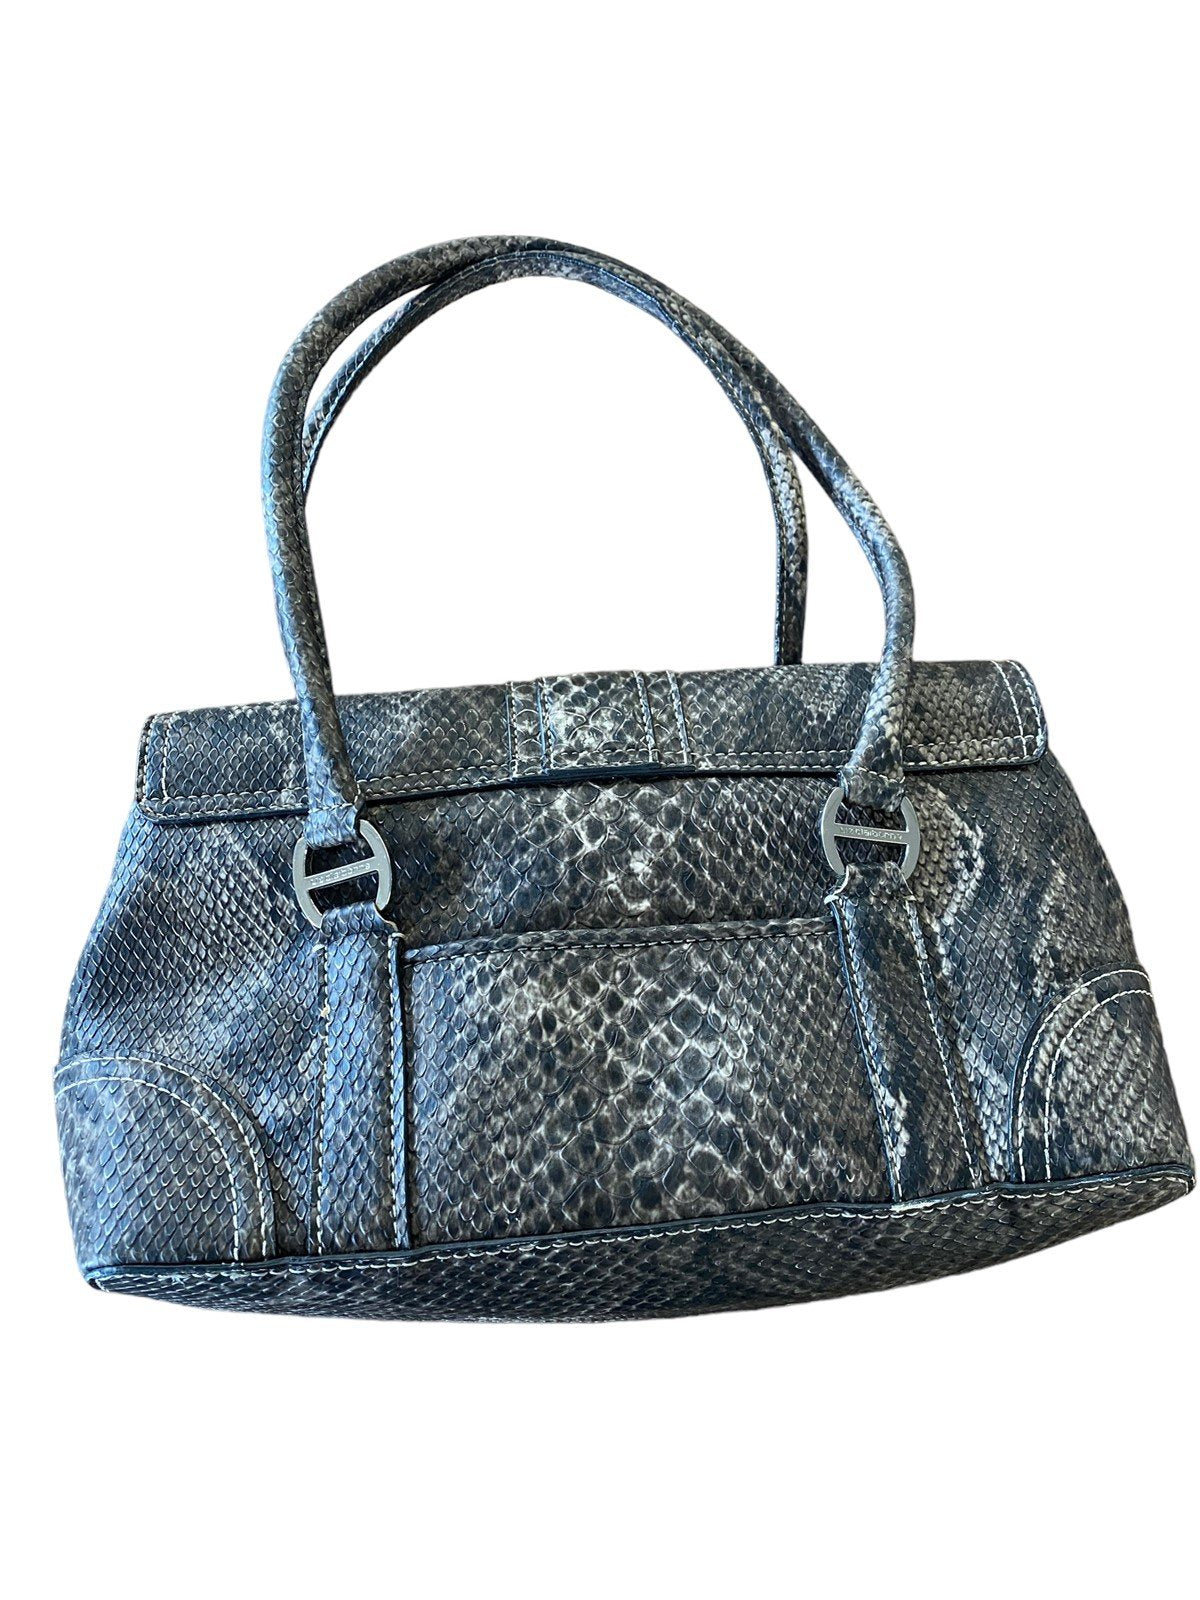 Buy TASCHEN shoulder bag/large 3 compartment handbag Online In India At  Discounted Prices